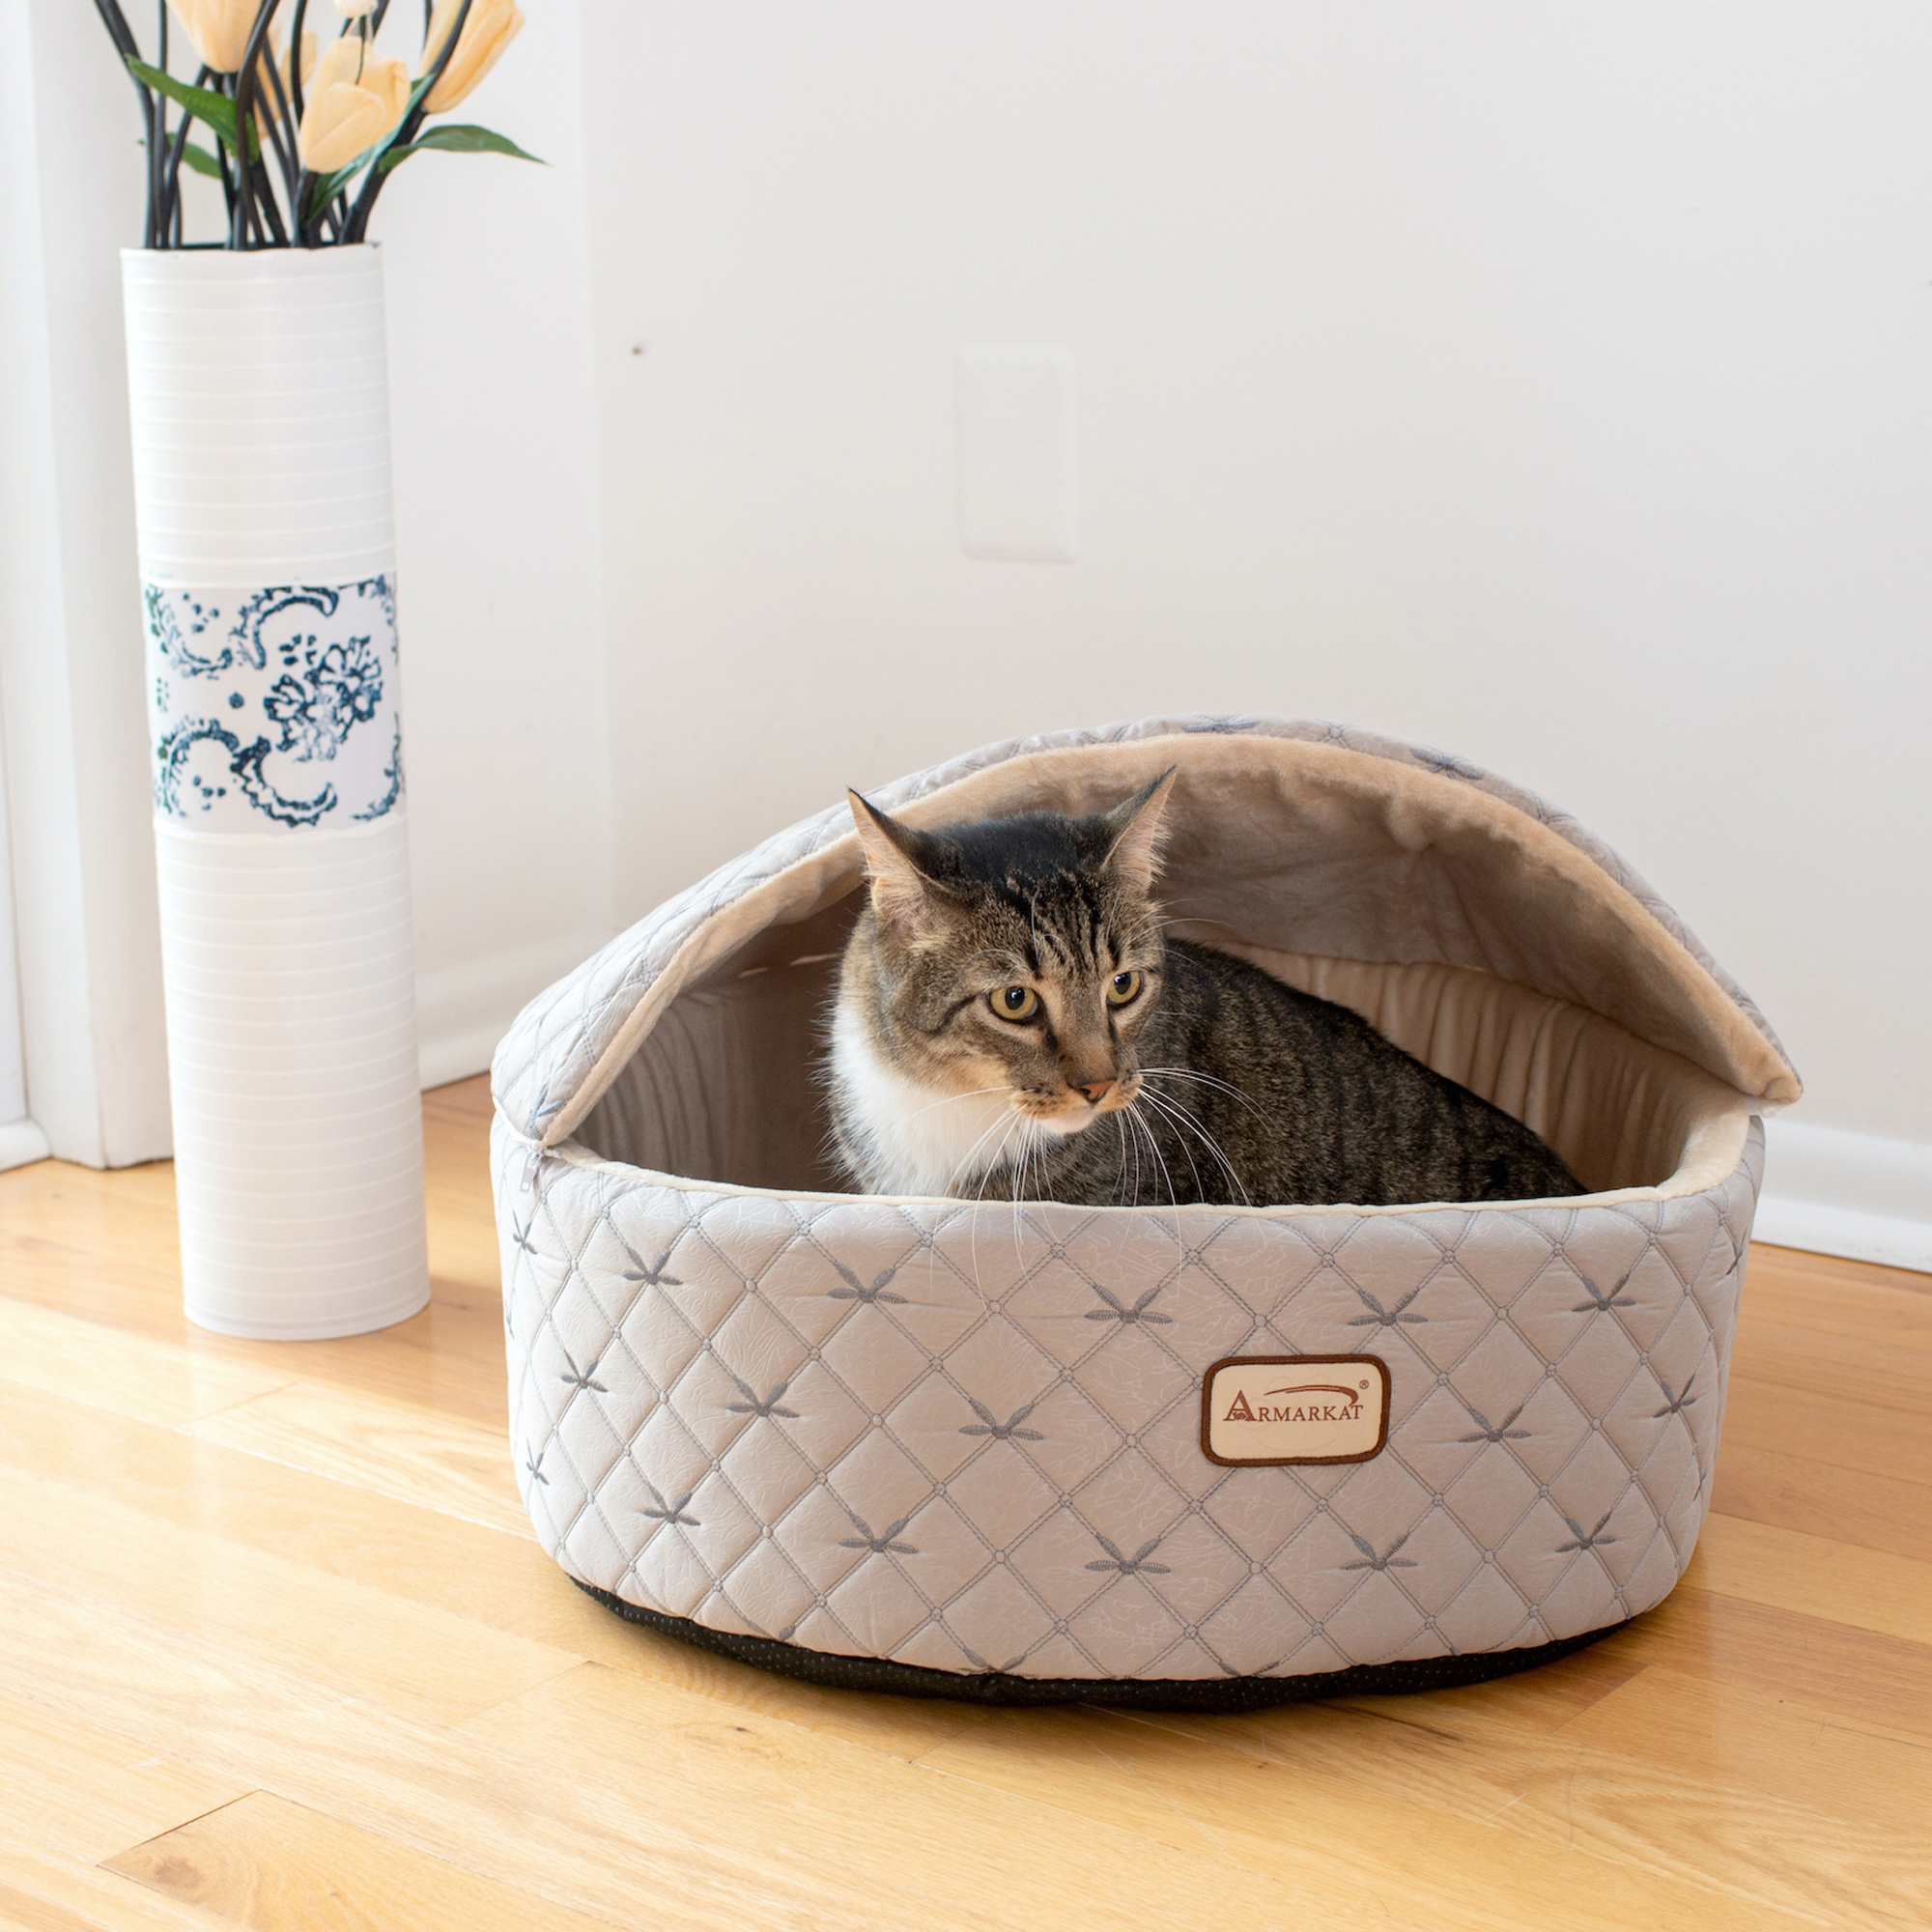 C33hqh-mh-s Armarkat Cat Bed, Small, Pale Silver And Beige C33hqh-mh-s